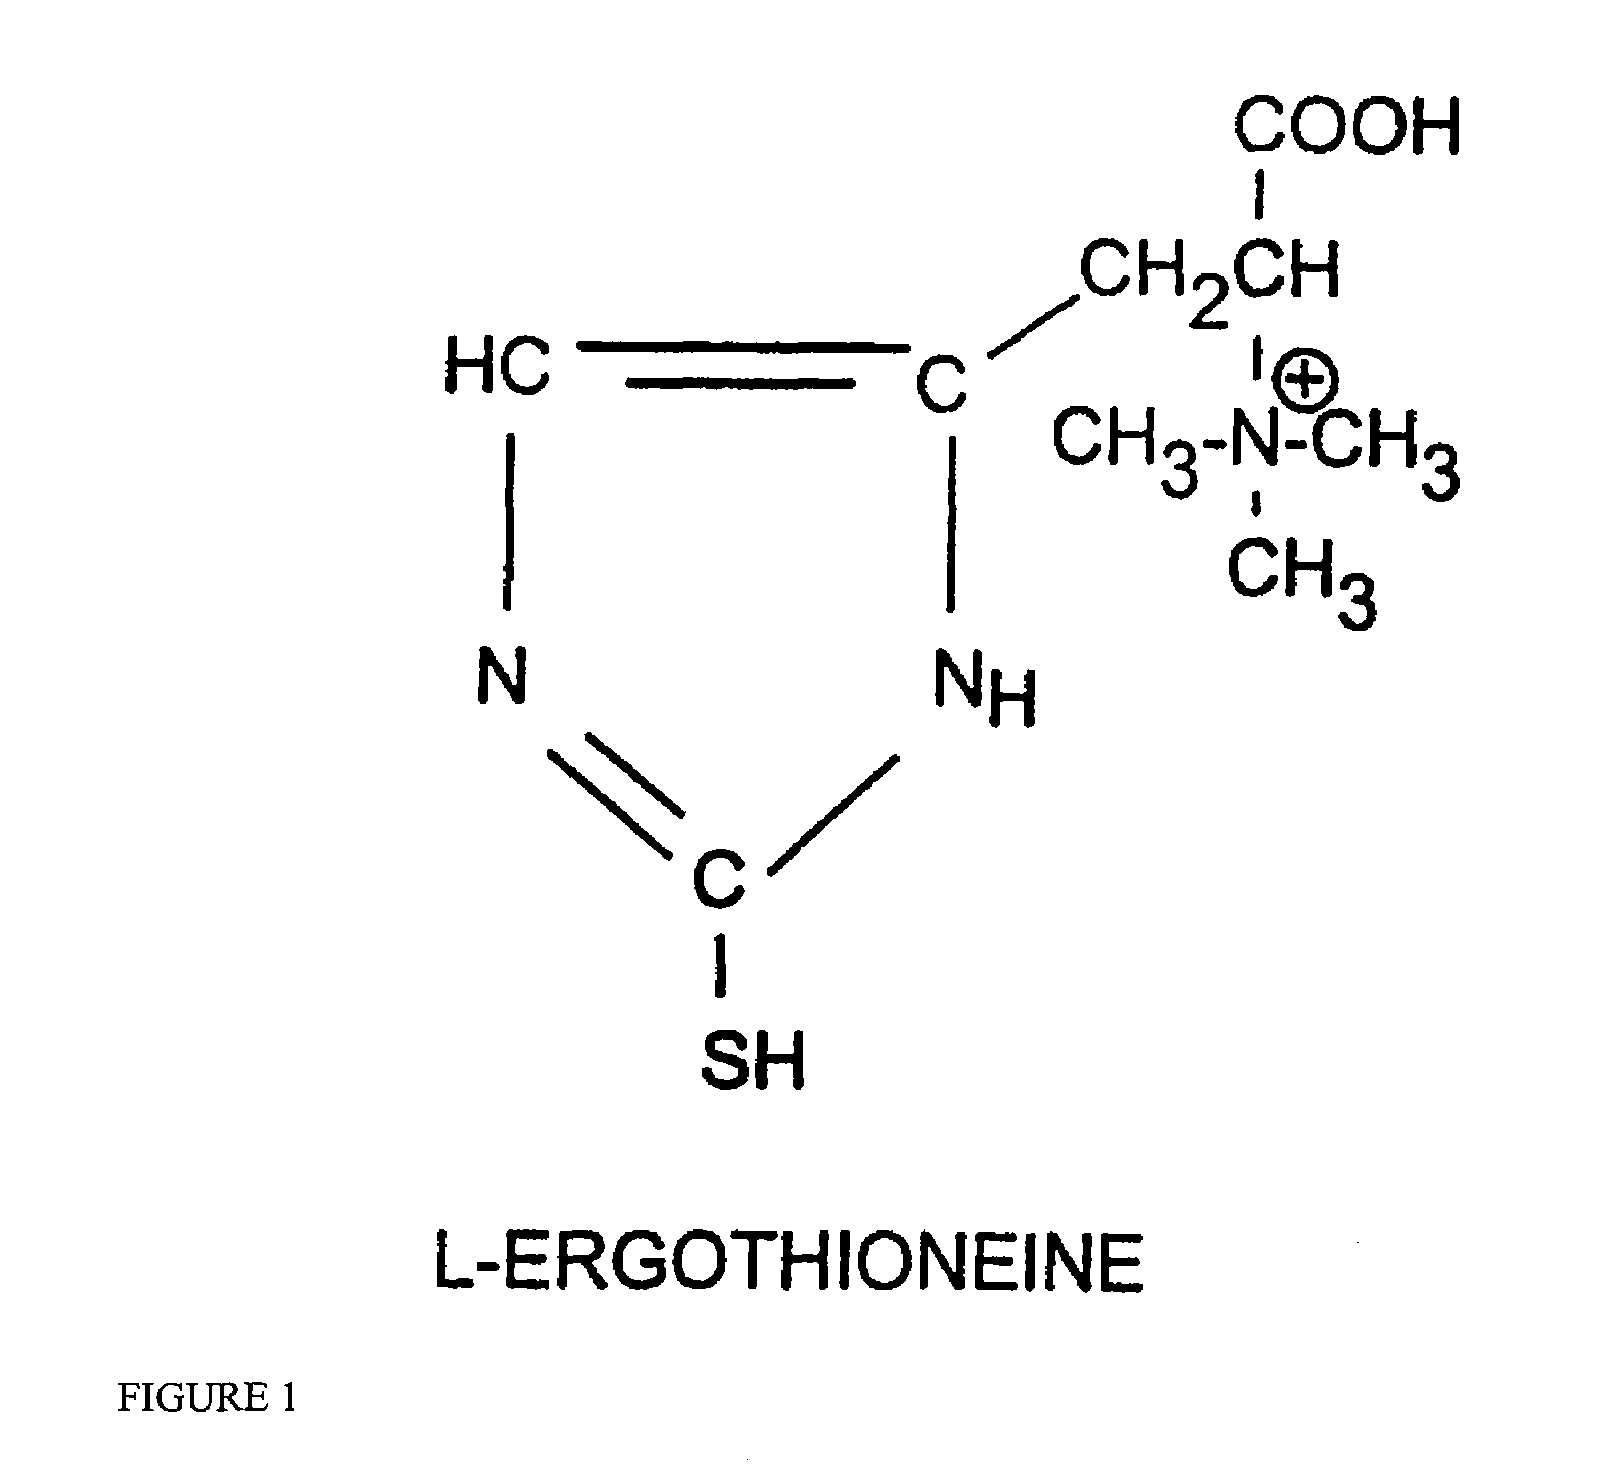 Use of ergothioneine as a preservative in foods and beverages